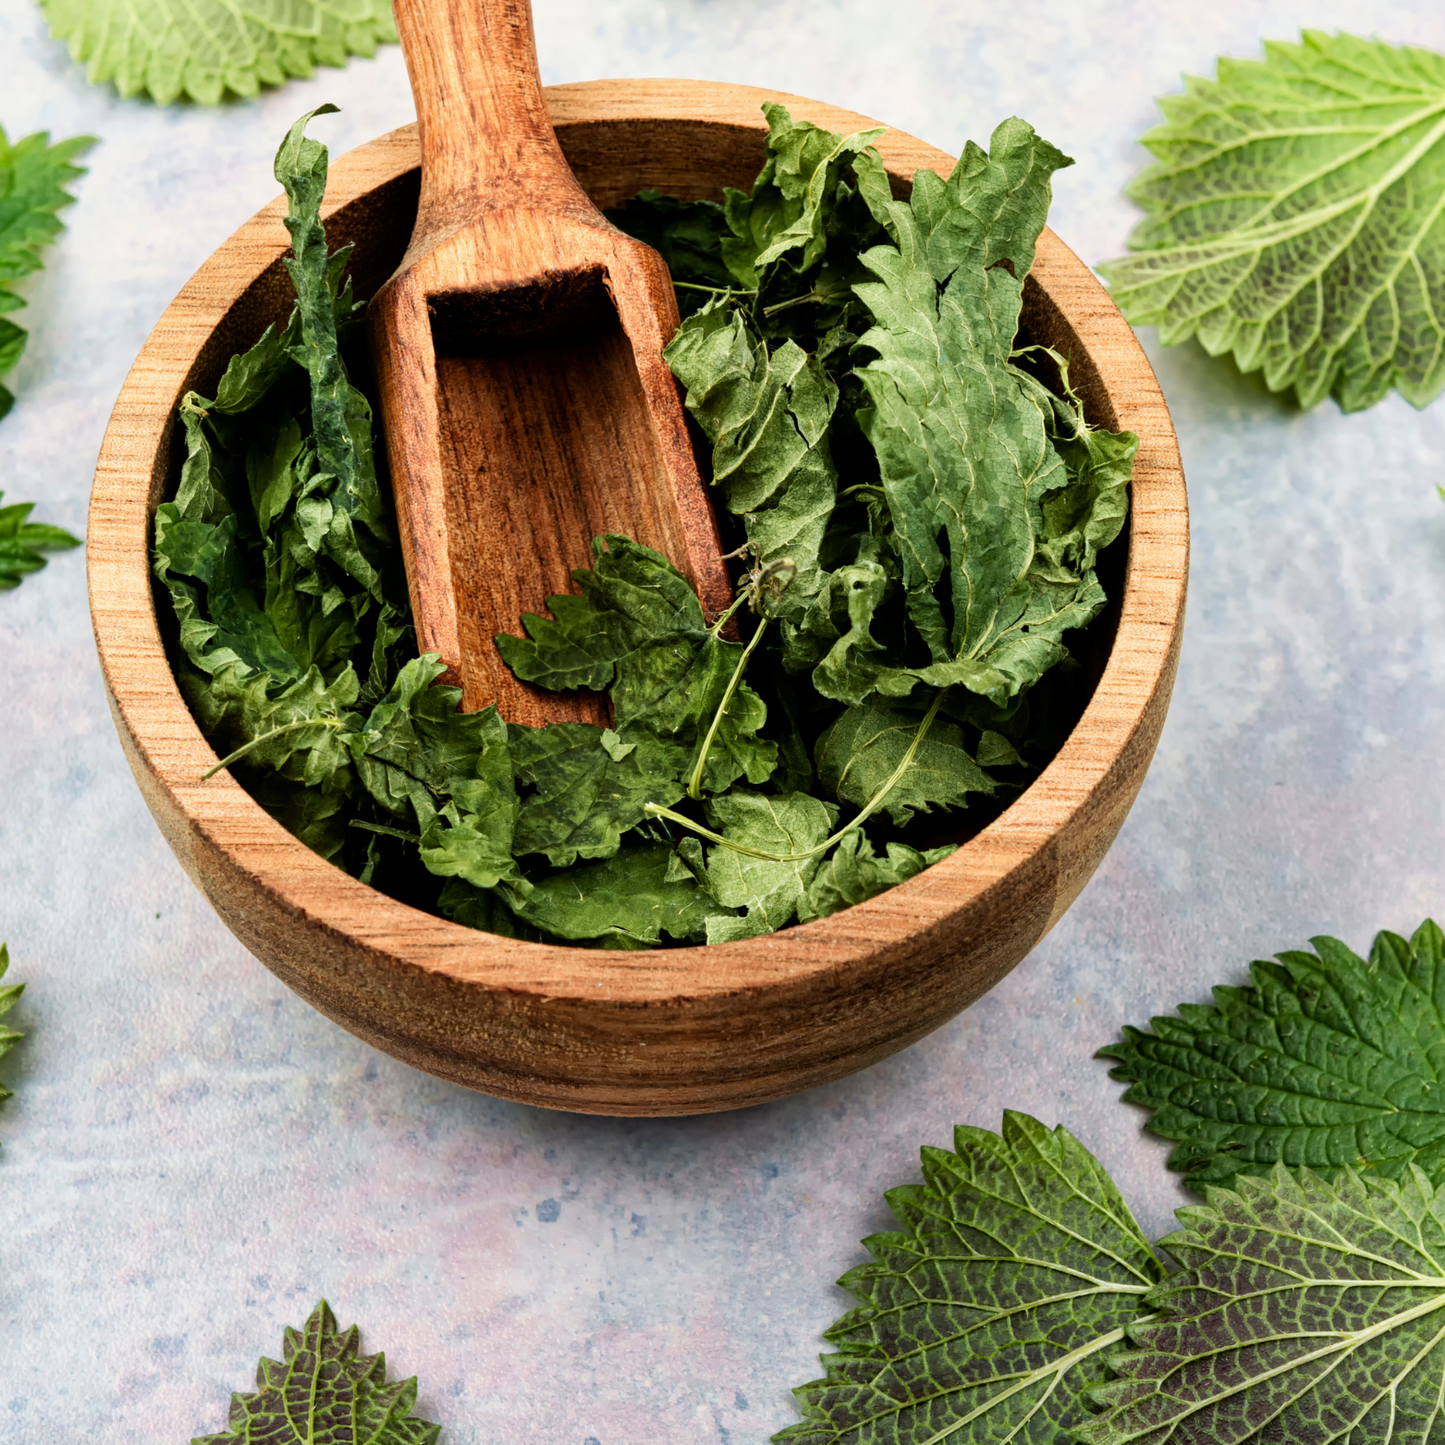 Stinging Nettle Leaf Herb For Protection from Harm, Ward Off Evil, Reverse Curses